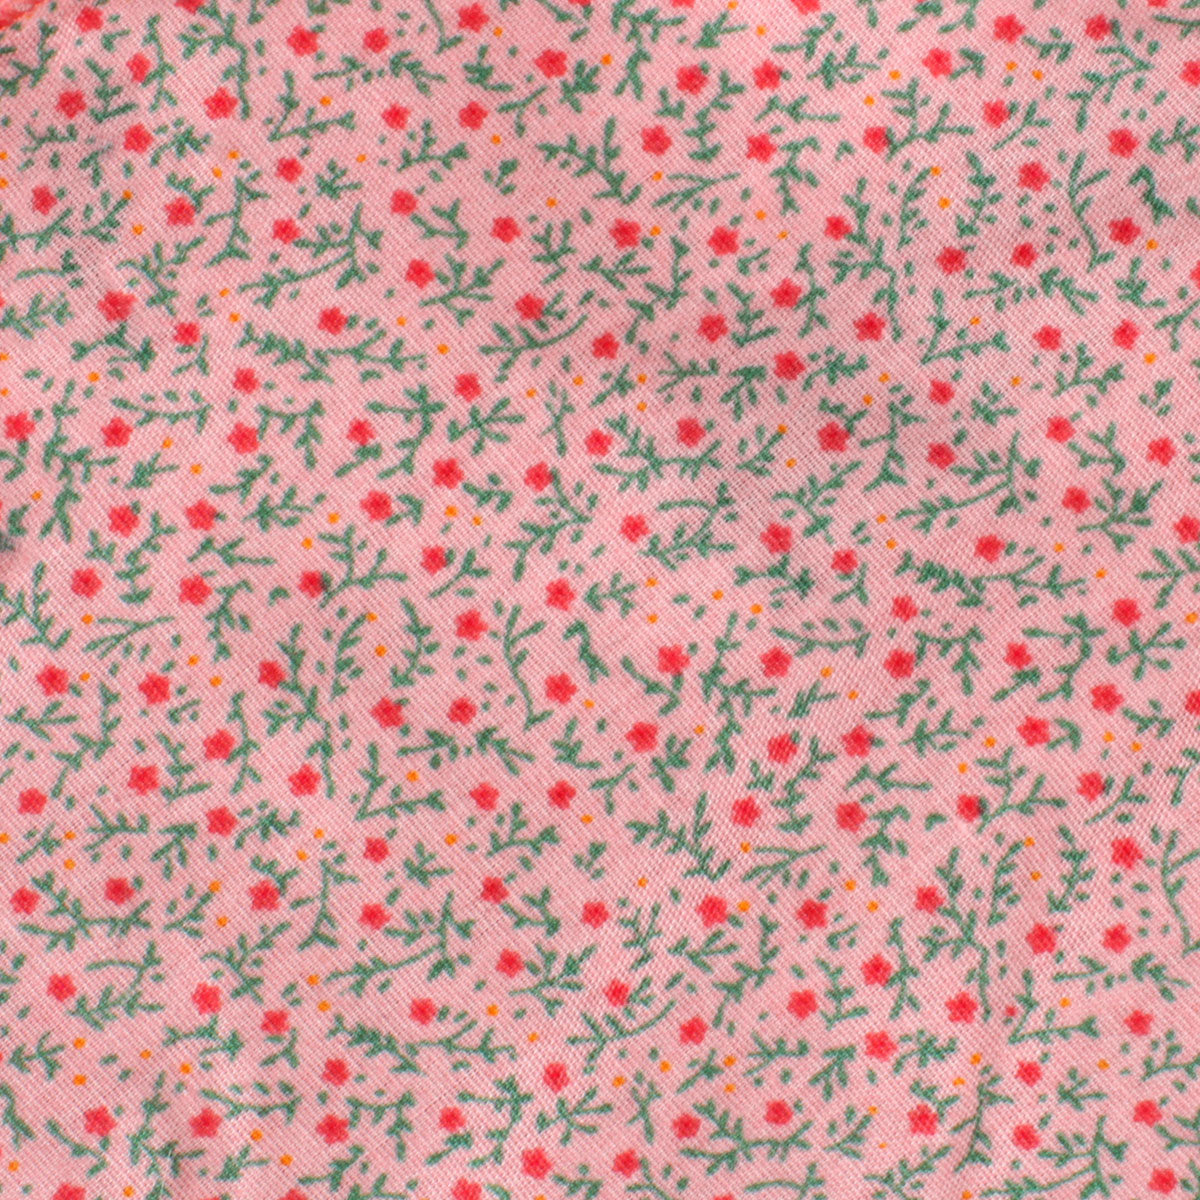 Houston Pink Floral Pocket Square Fabric